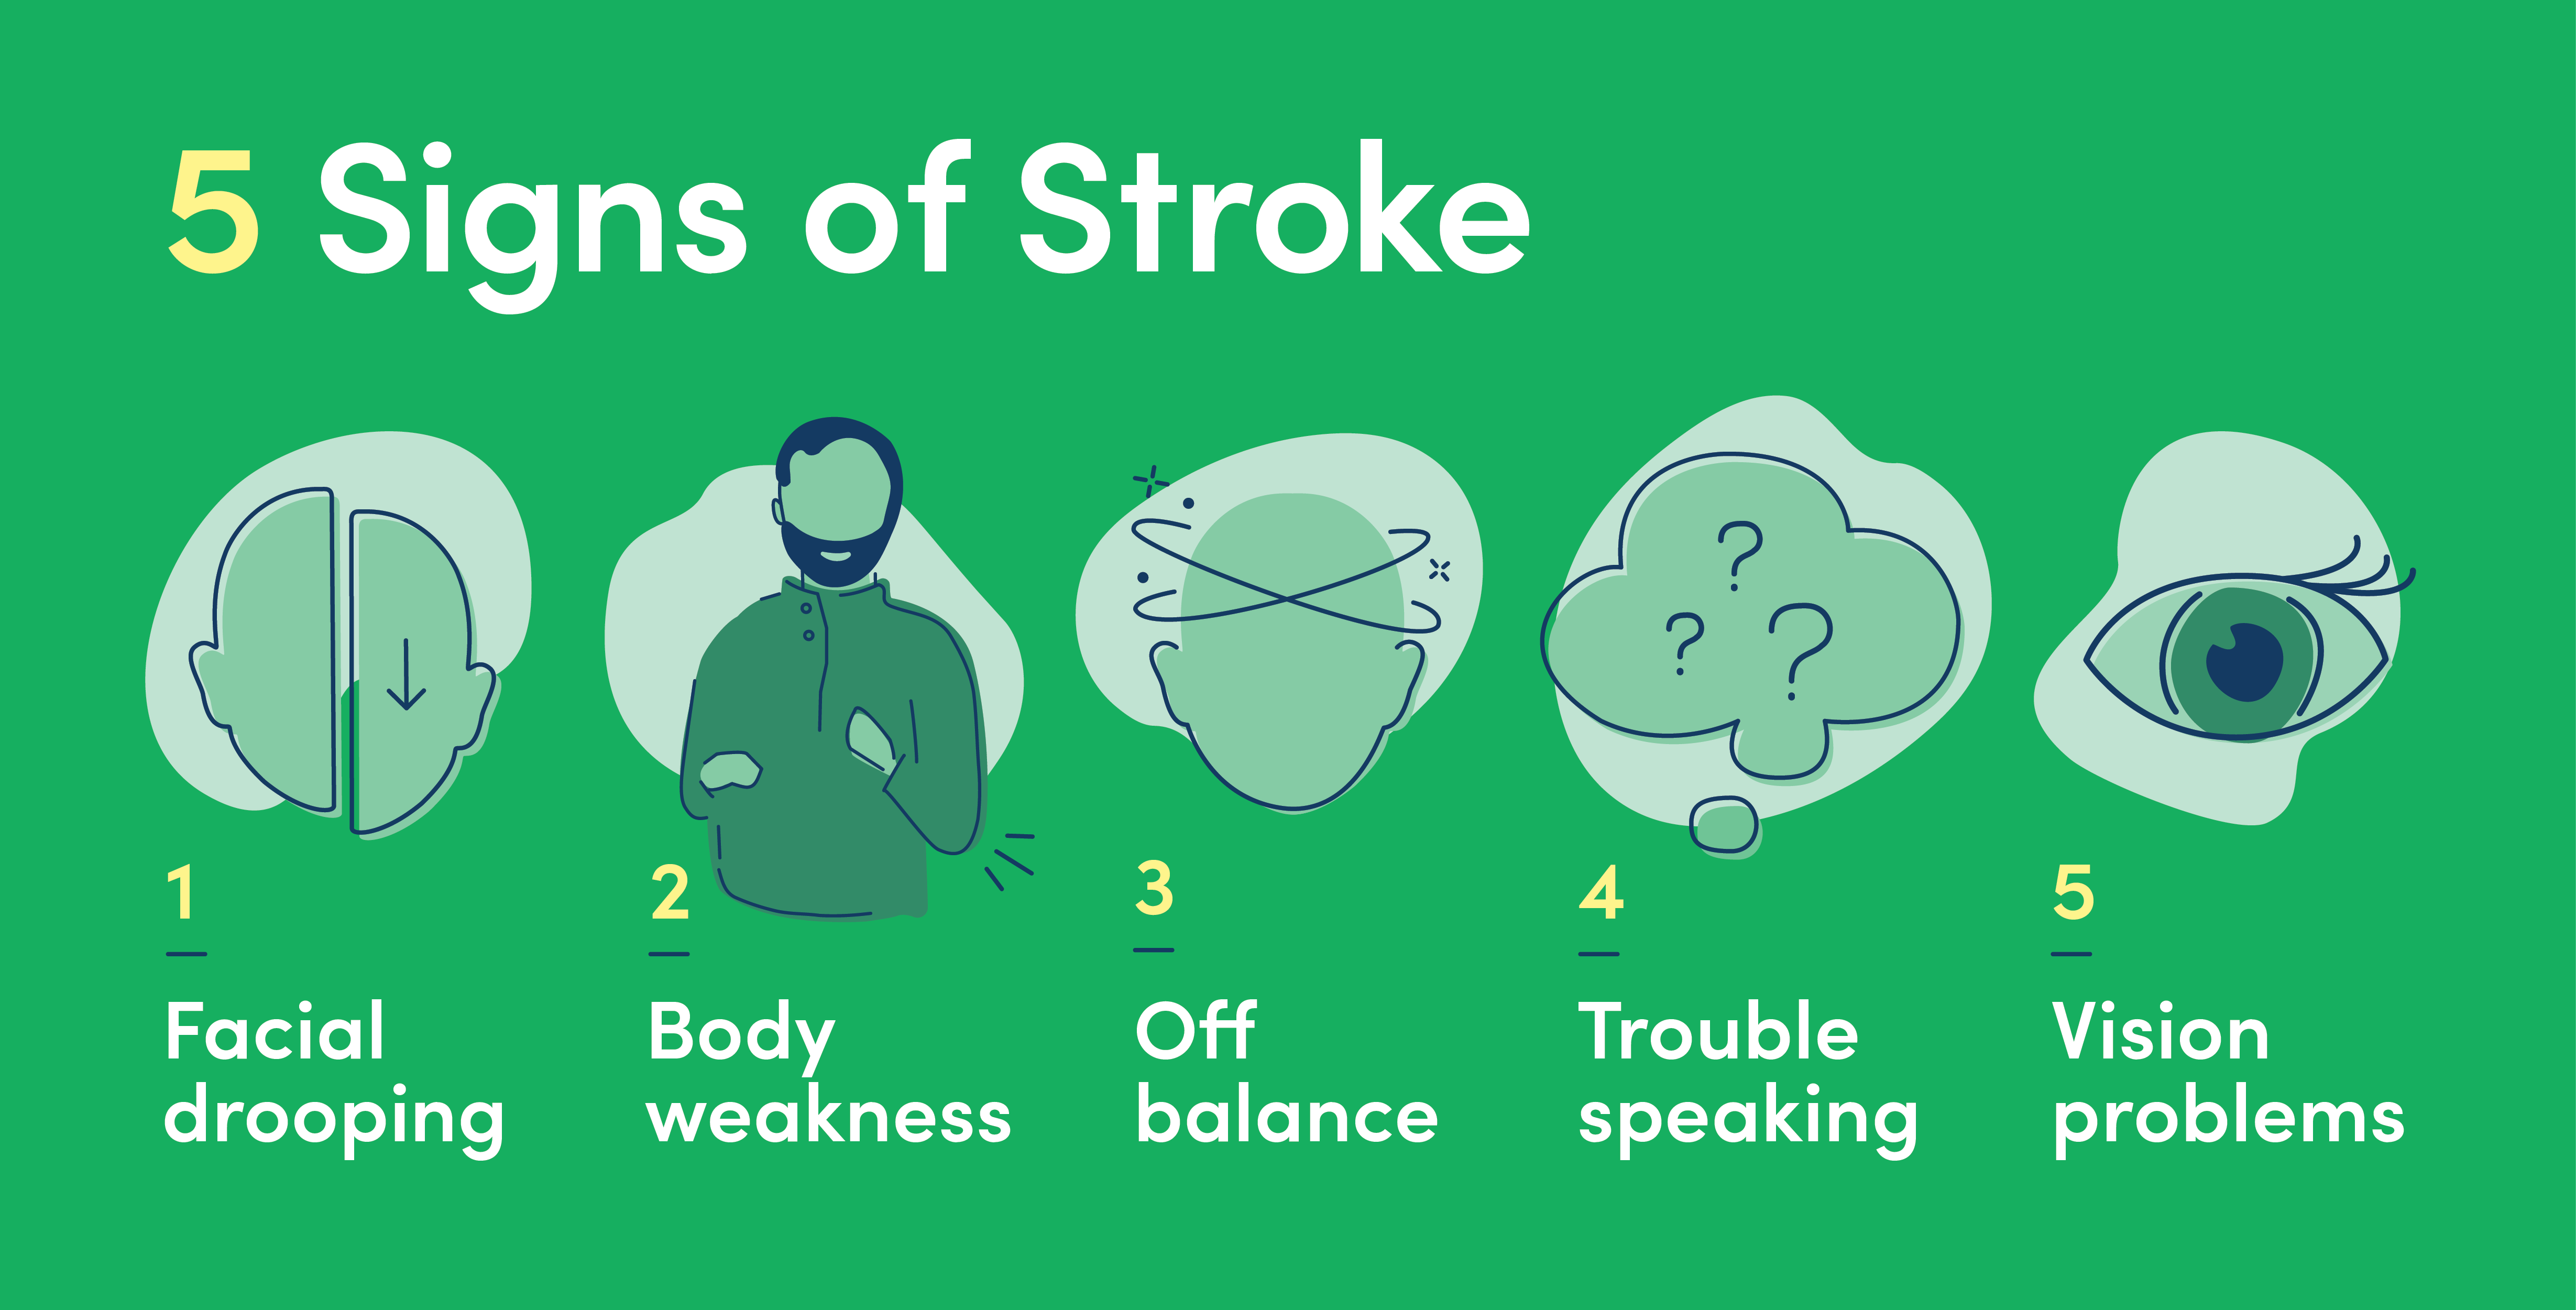 the five signs of a stroke include facial drooping, body weakness, off balance, trouble speaking, and vision problems